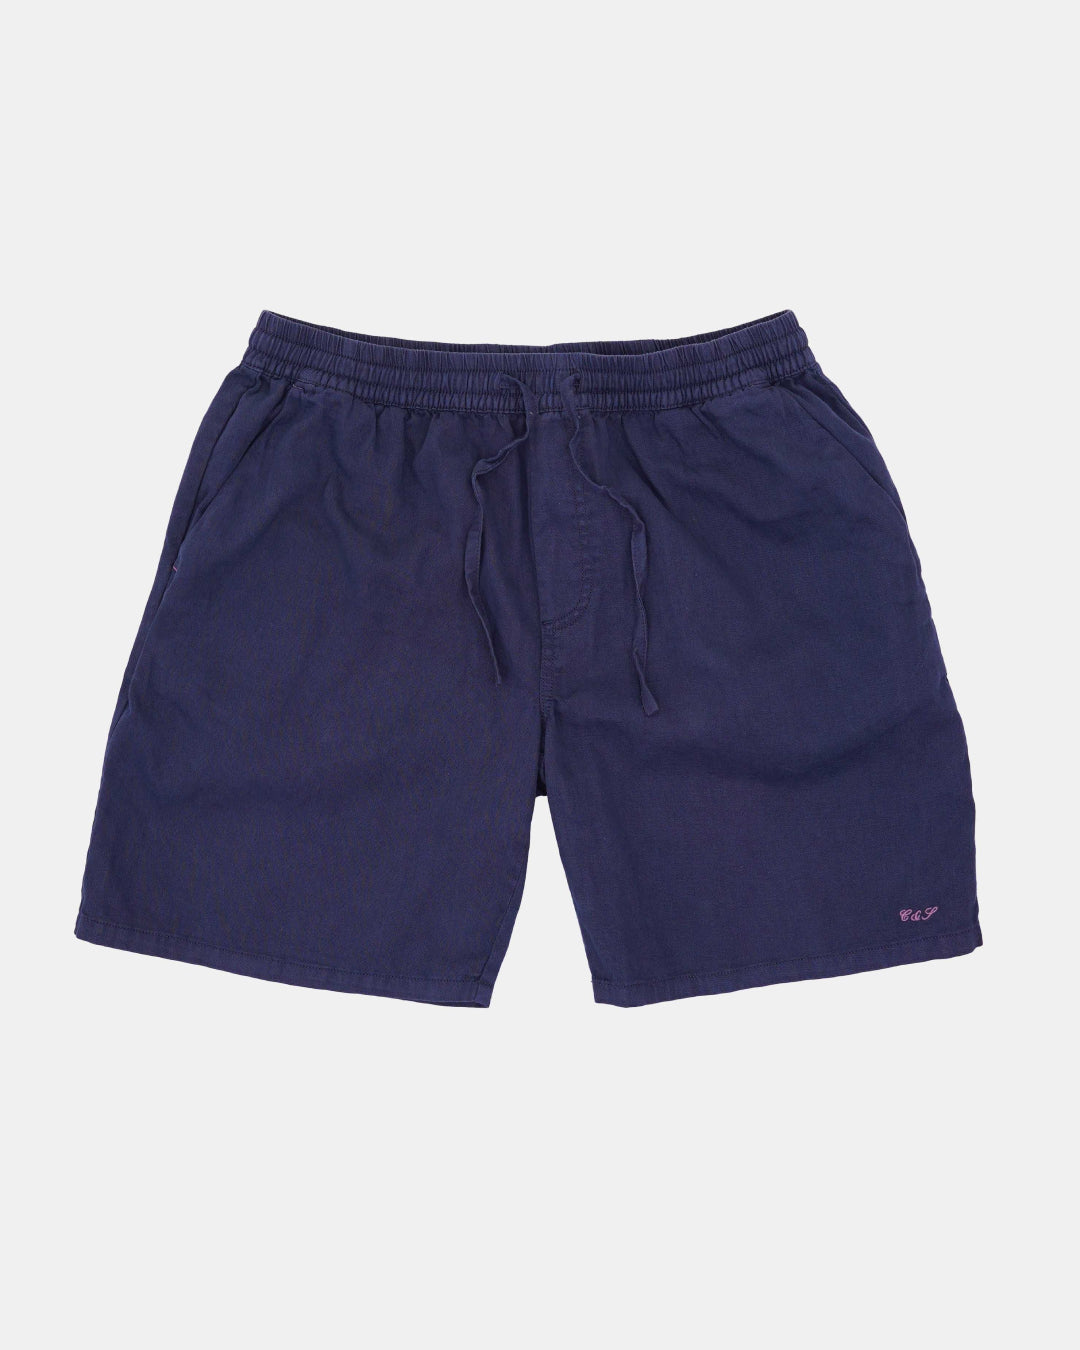 Shorts Linen Blend in Navy Shorts Colours and Sons   